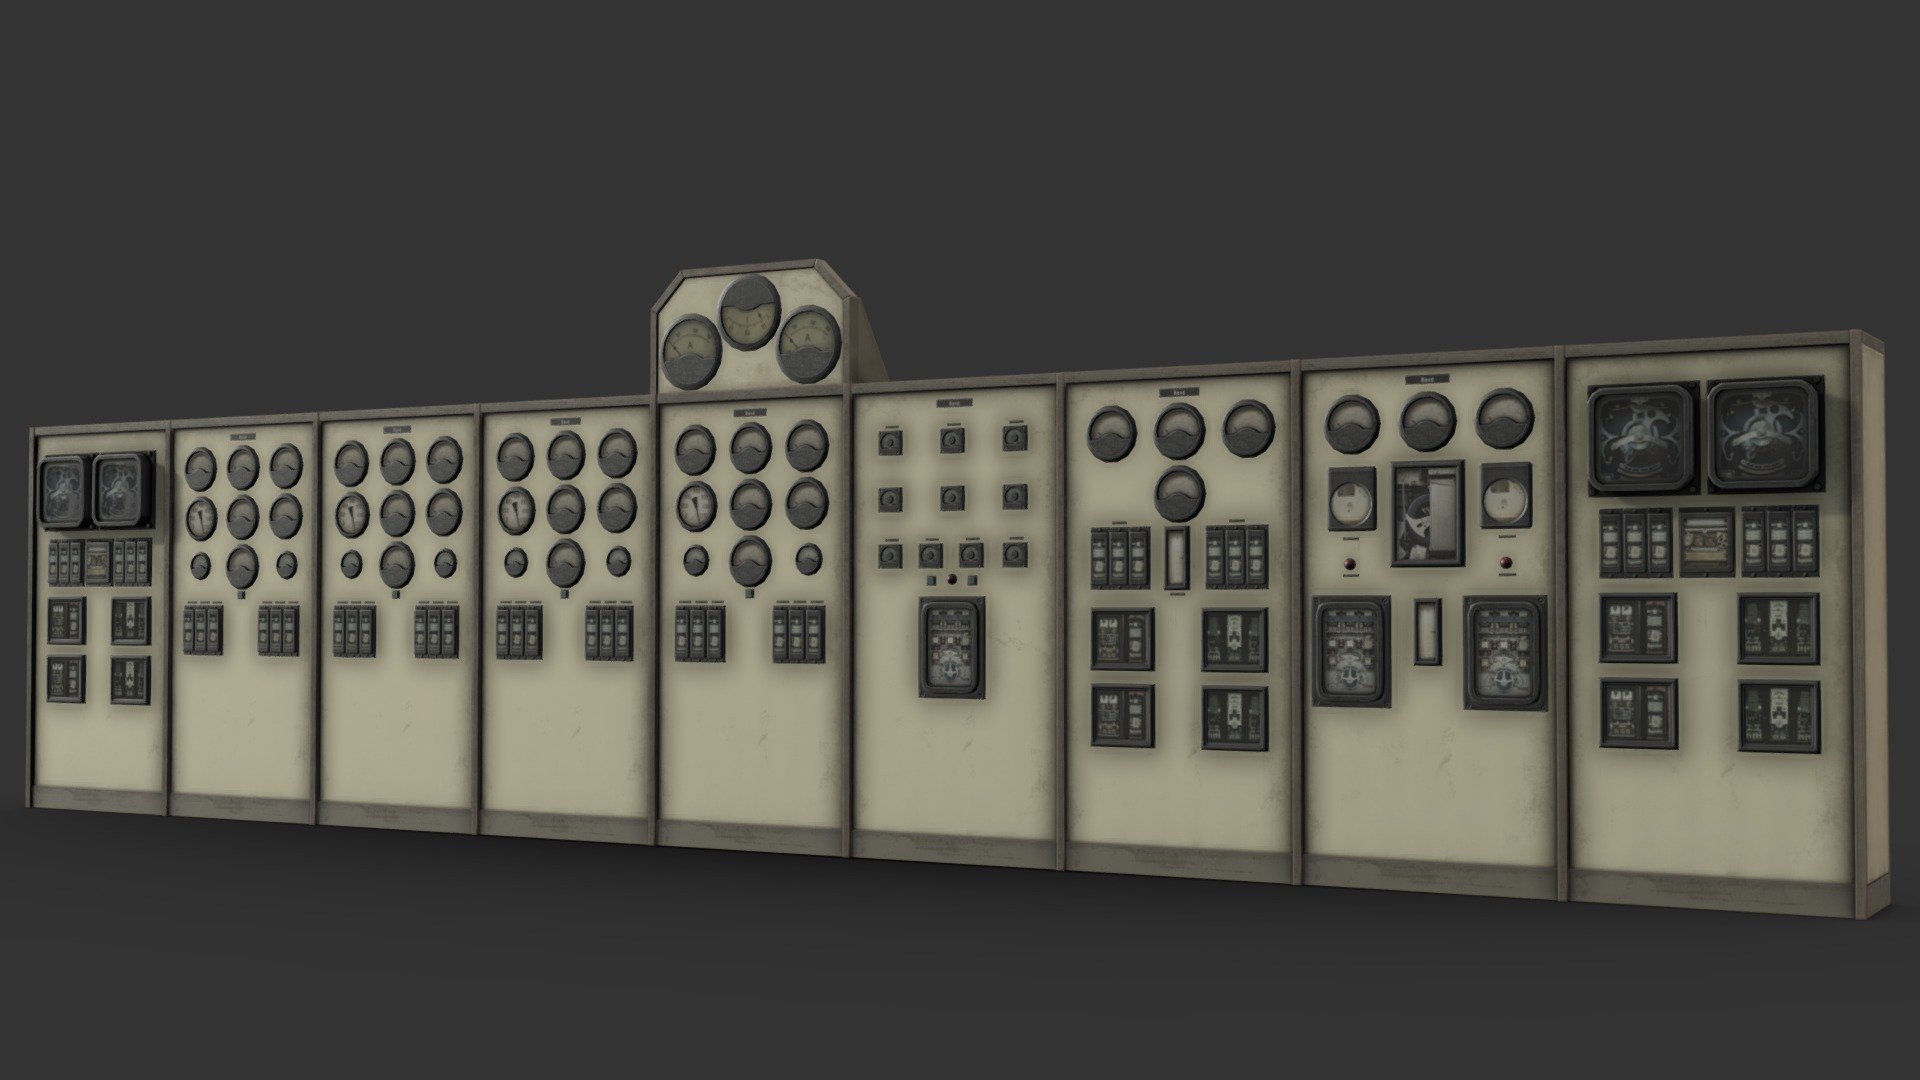 Some assembly required, but here's a kit I made up for making custom antique-style control panels.
There's an assemble-your-own-layout file in the additional files.

Made in 3DSMax and Substance Painter - Control Panel Kit - Buy Royalty Free 3D model by Renafox (@kryik1023) 3d model